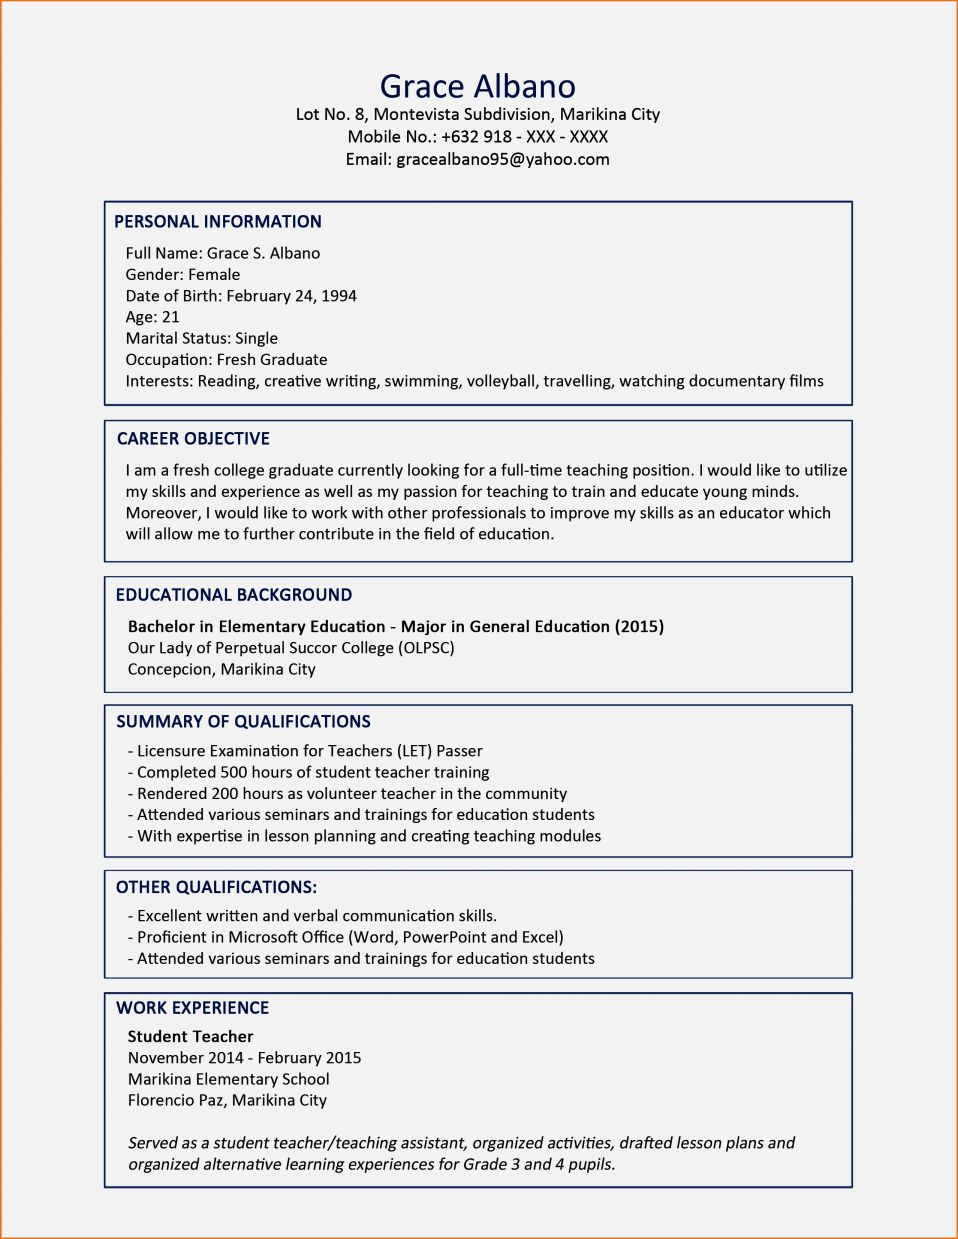 Sample Cover Letter For Fresh Graduates In Nigeria throughout dimensions 958 X 1239